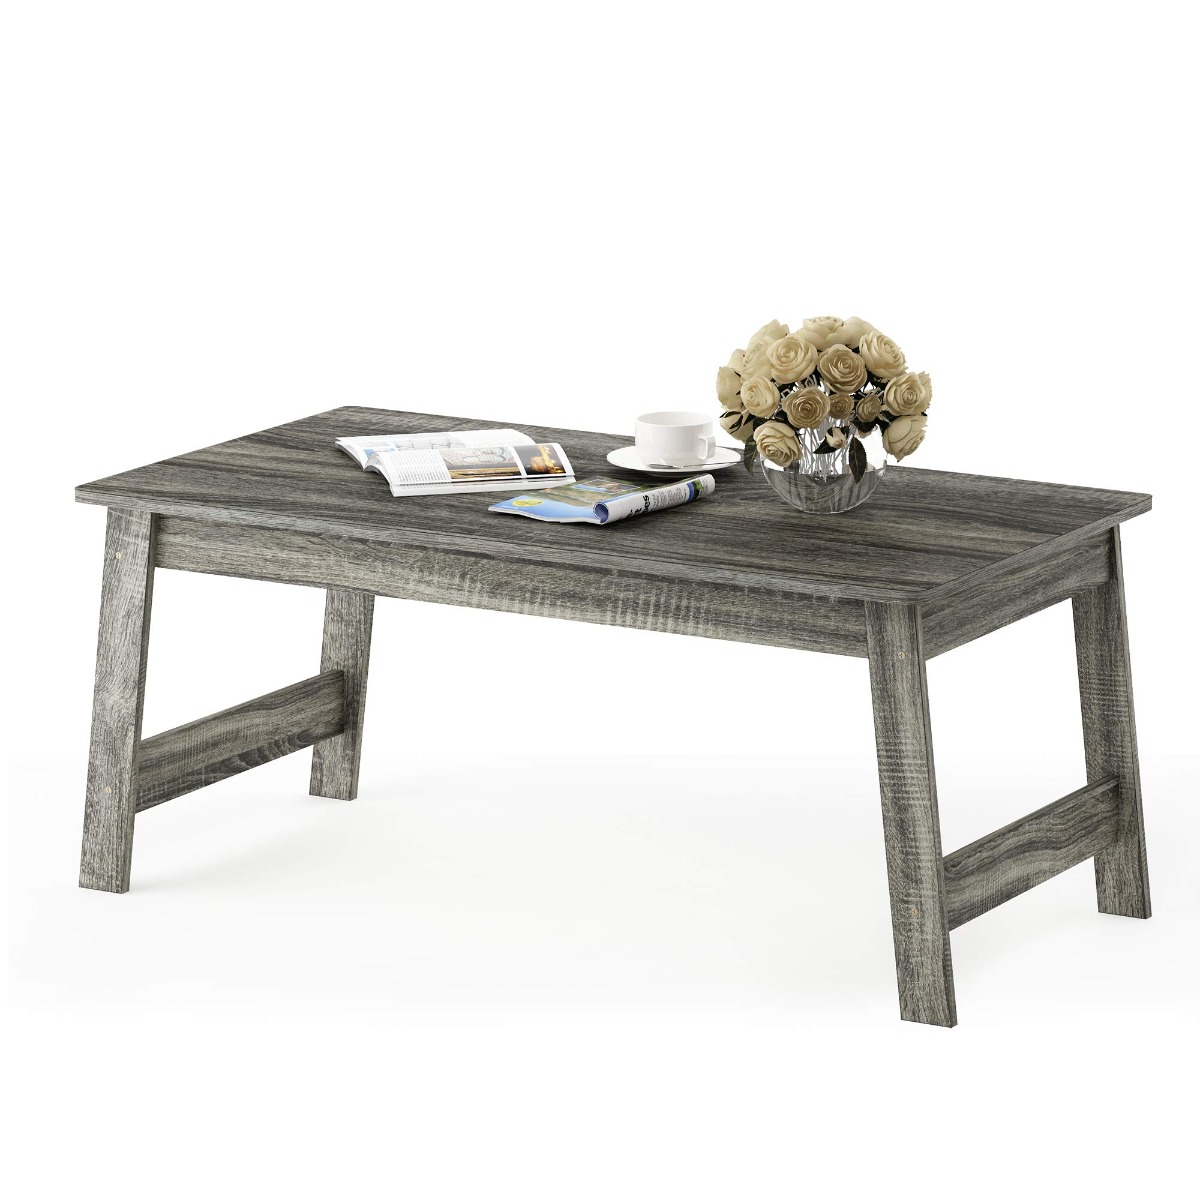 

Simple Assembly Multifunction Wooden Coffee Table, French Oak Grey, Suitable For Bedrooms, Living Rooms